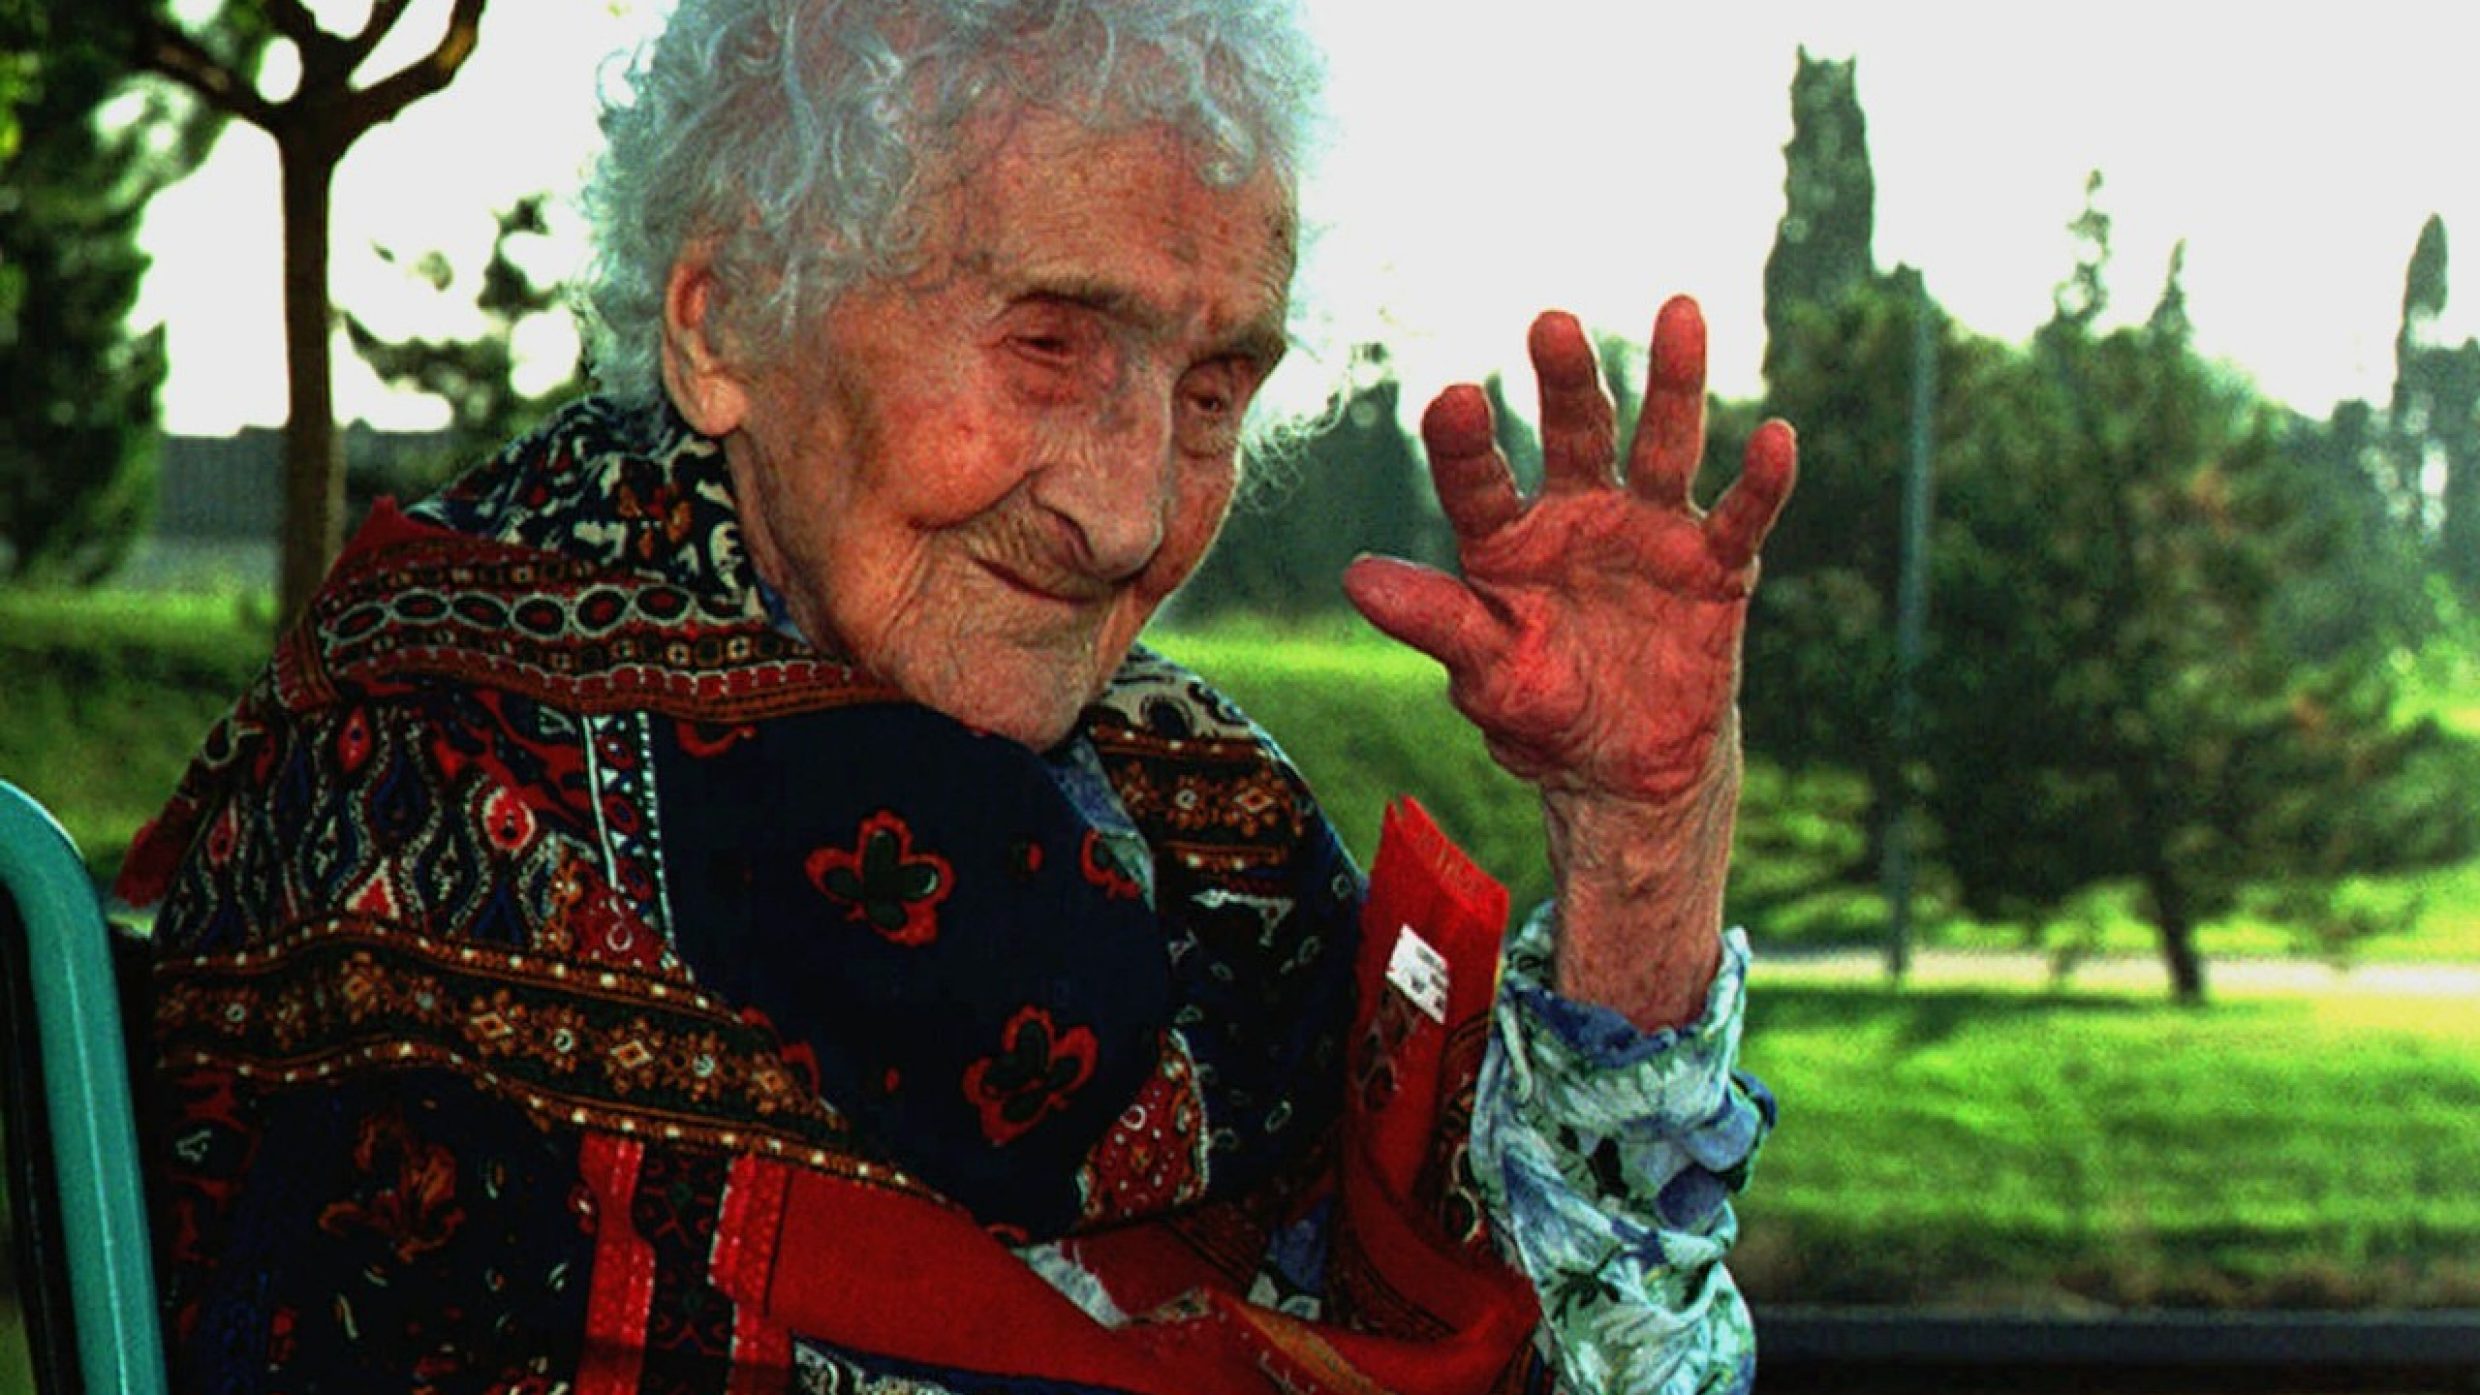 With an average life expectancy of just under 72, man is in the top ten species in terms of longevity. The longest-living person on record is held by the French woman Jeanne Calment, who lived to 122 (1875-1997).